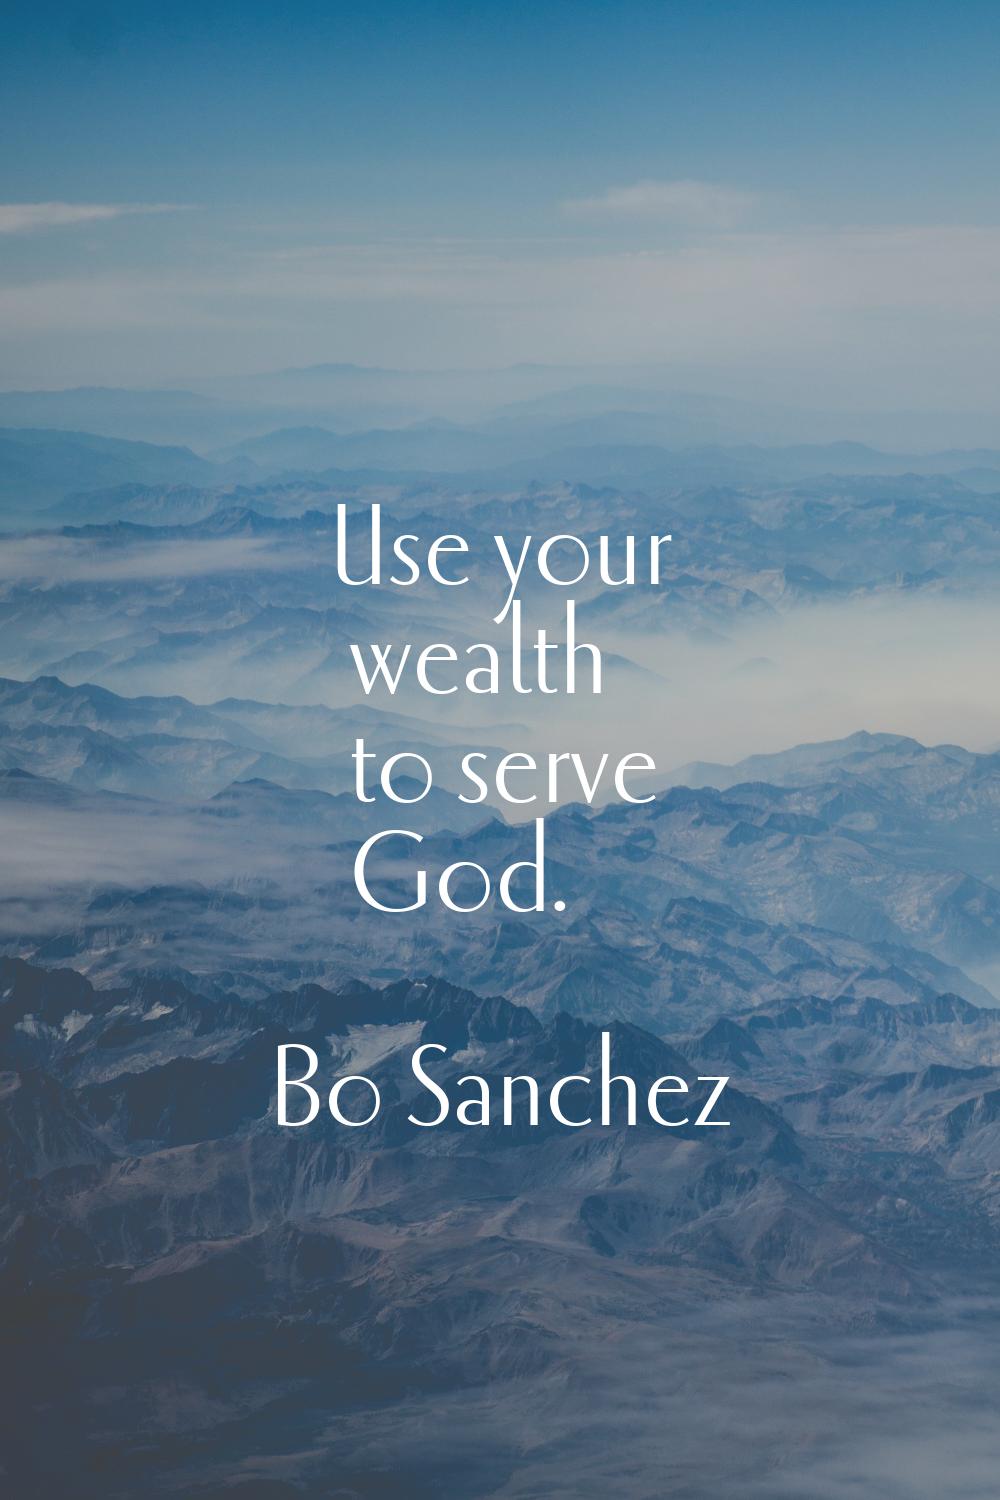 Use your wealth to serve God.